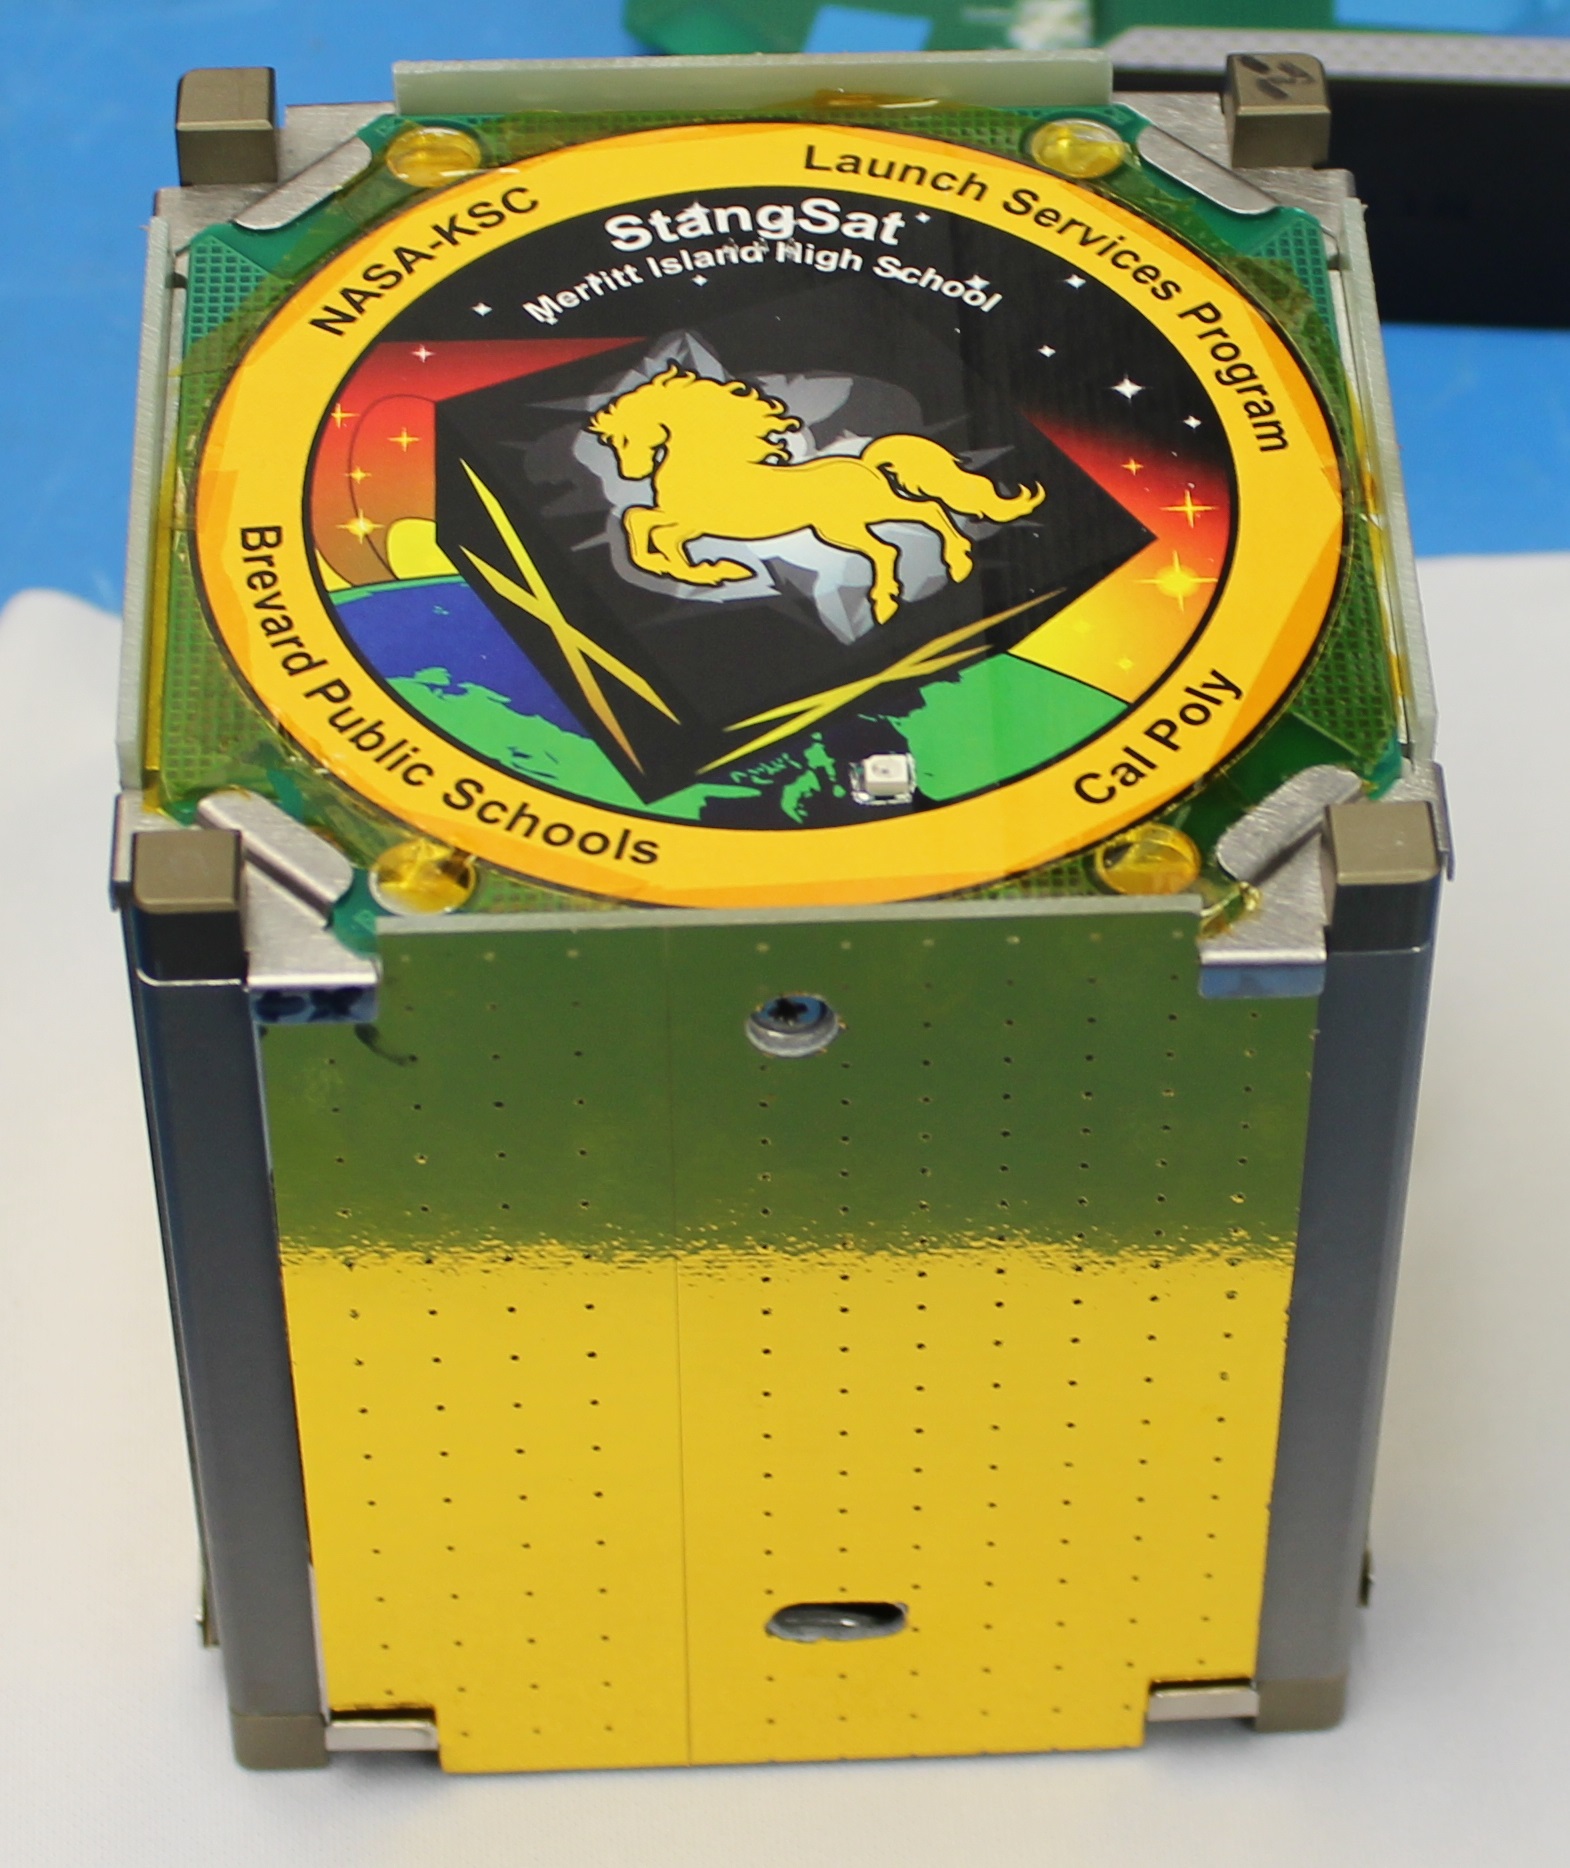 A photograph of StangSat - a cube satellite (CubeSat) that was built and developed by Merritt Island High School students.